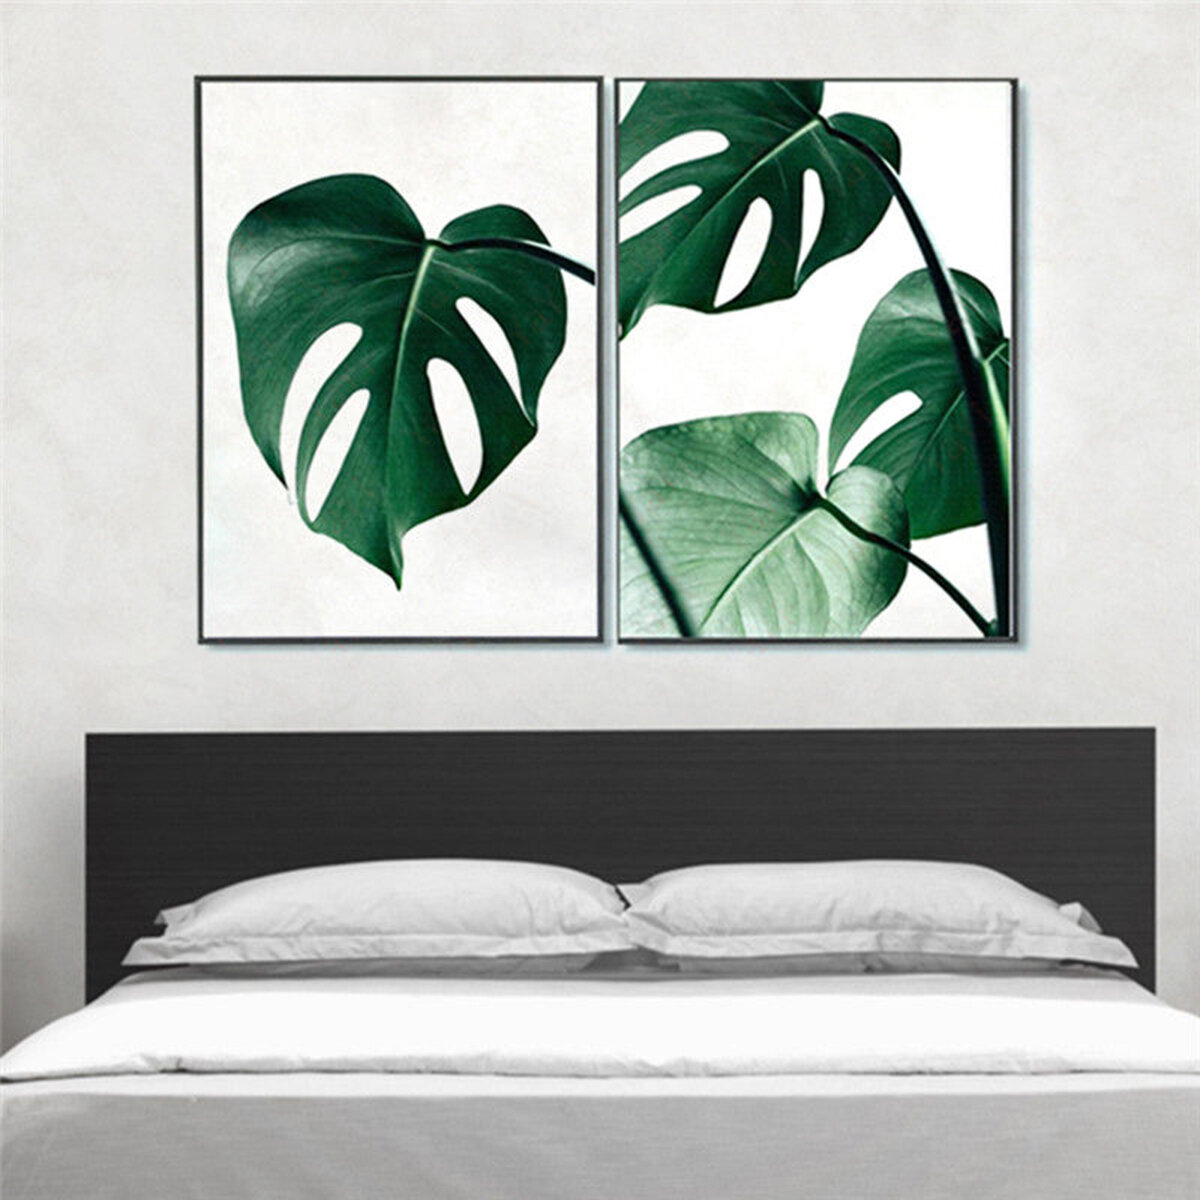 1 Piece Canvas Print Painting Nordic Green Plant Leaf Canvas Art Poster Print Wall Picture Home Deco